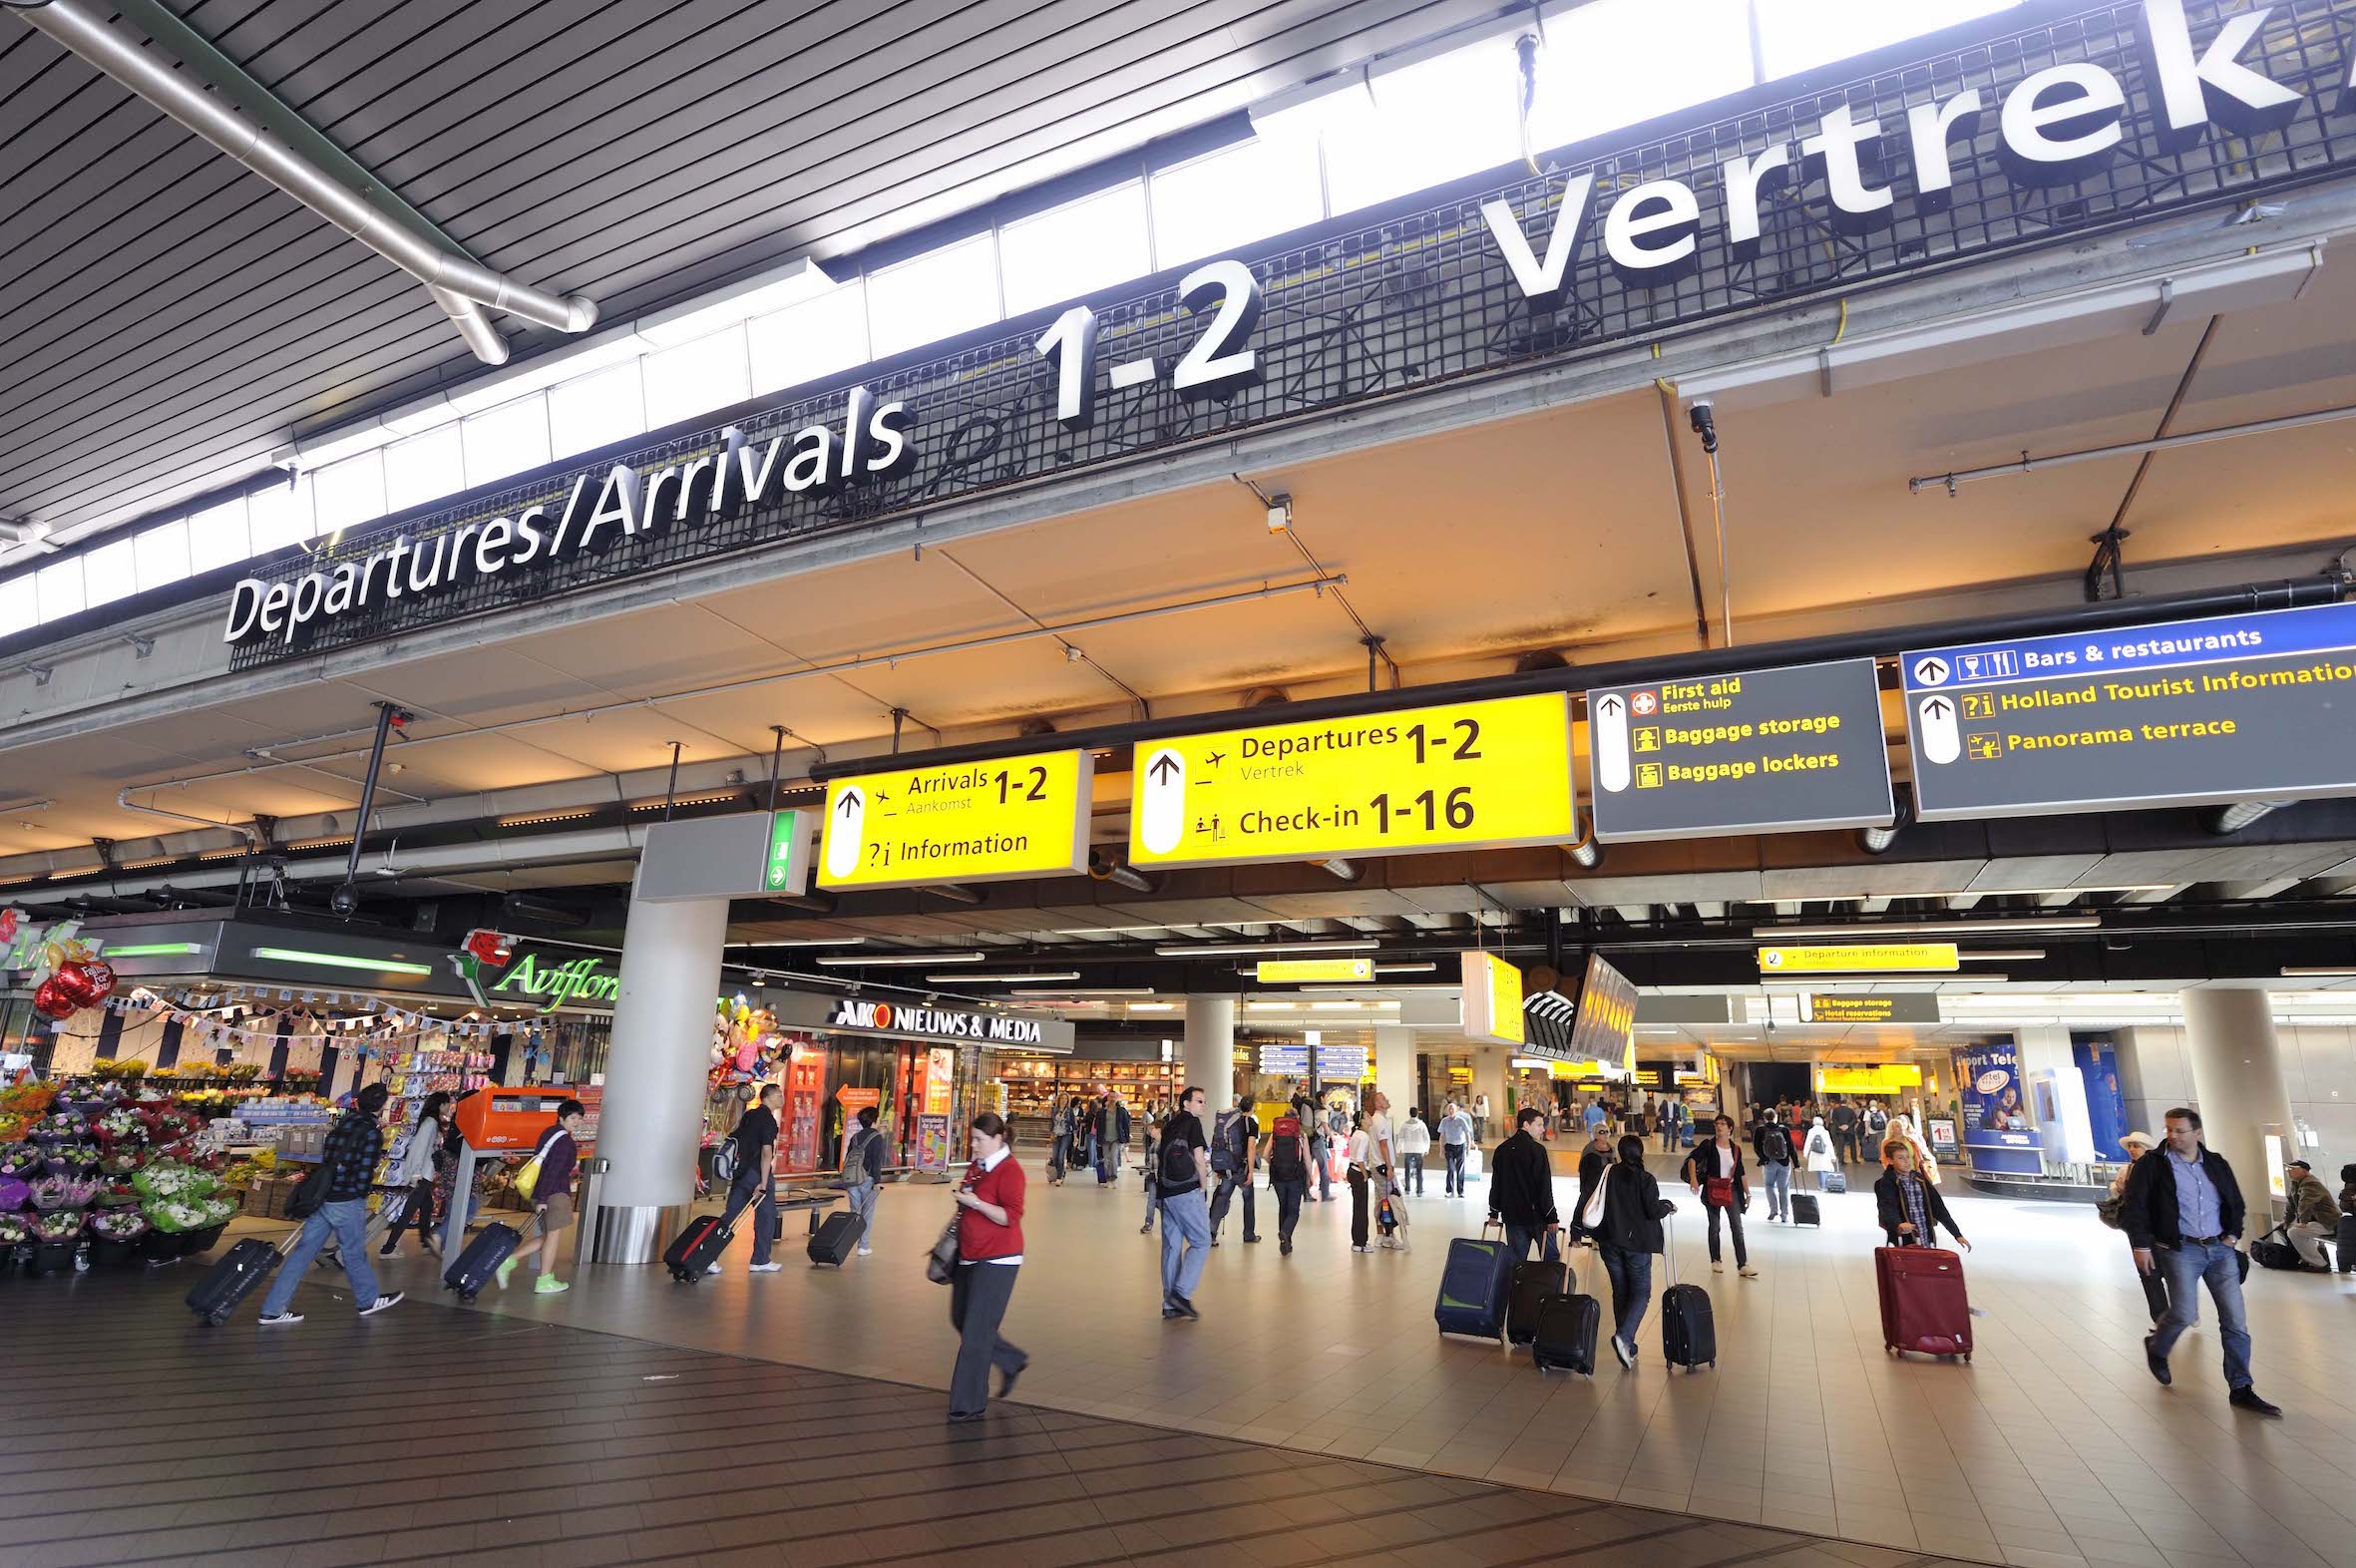 Long queues will continue to continue at Schiphol Airport